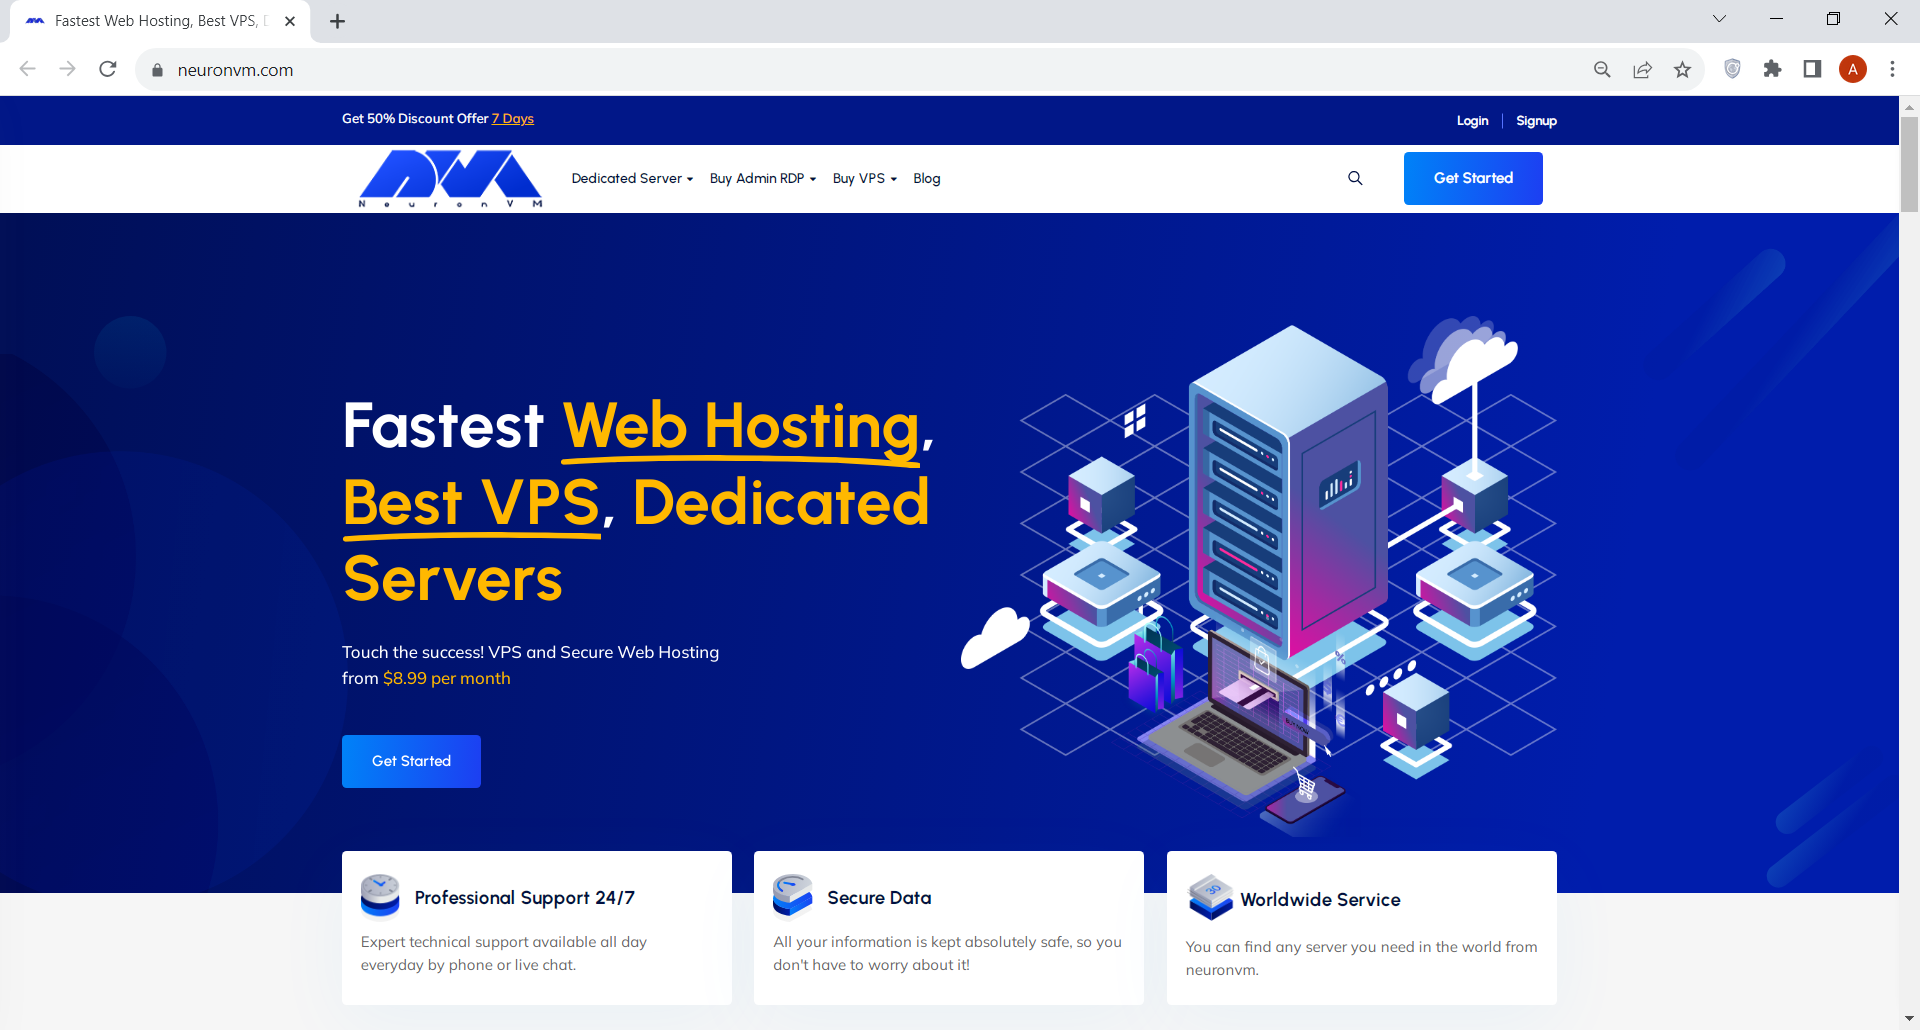 Top VPS Providers: NeuronVM